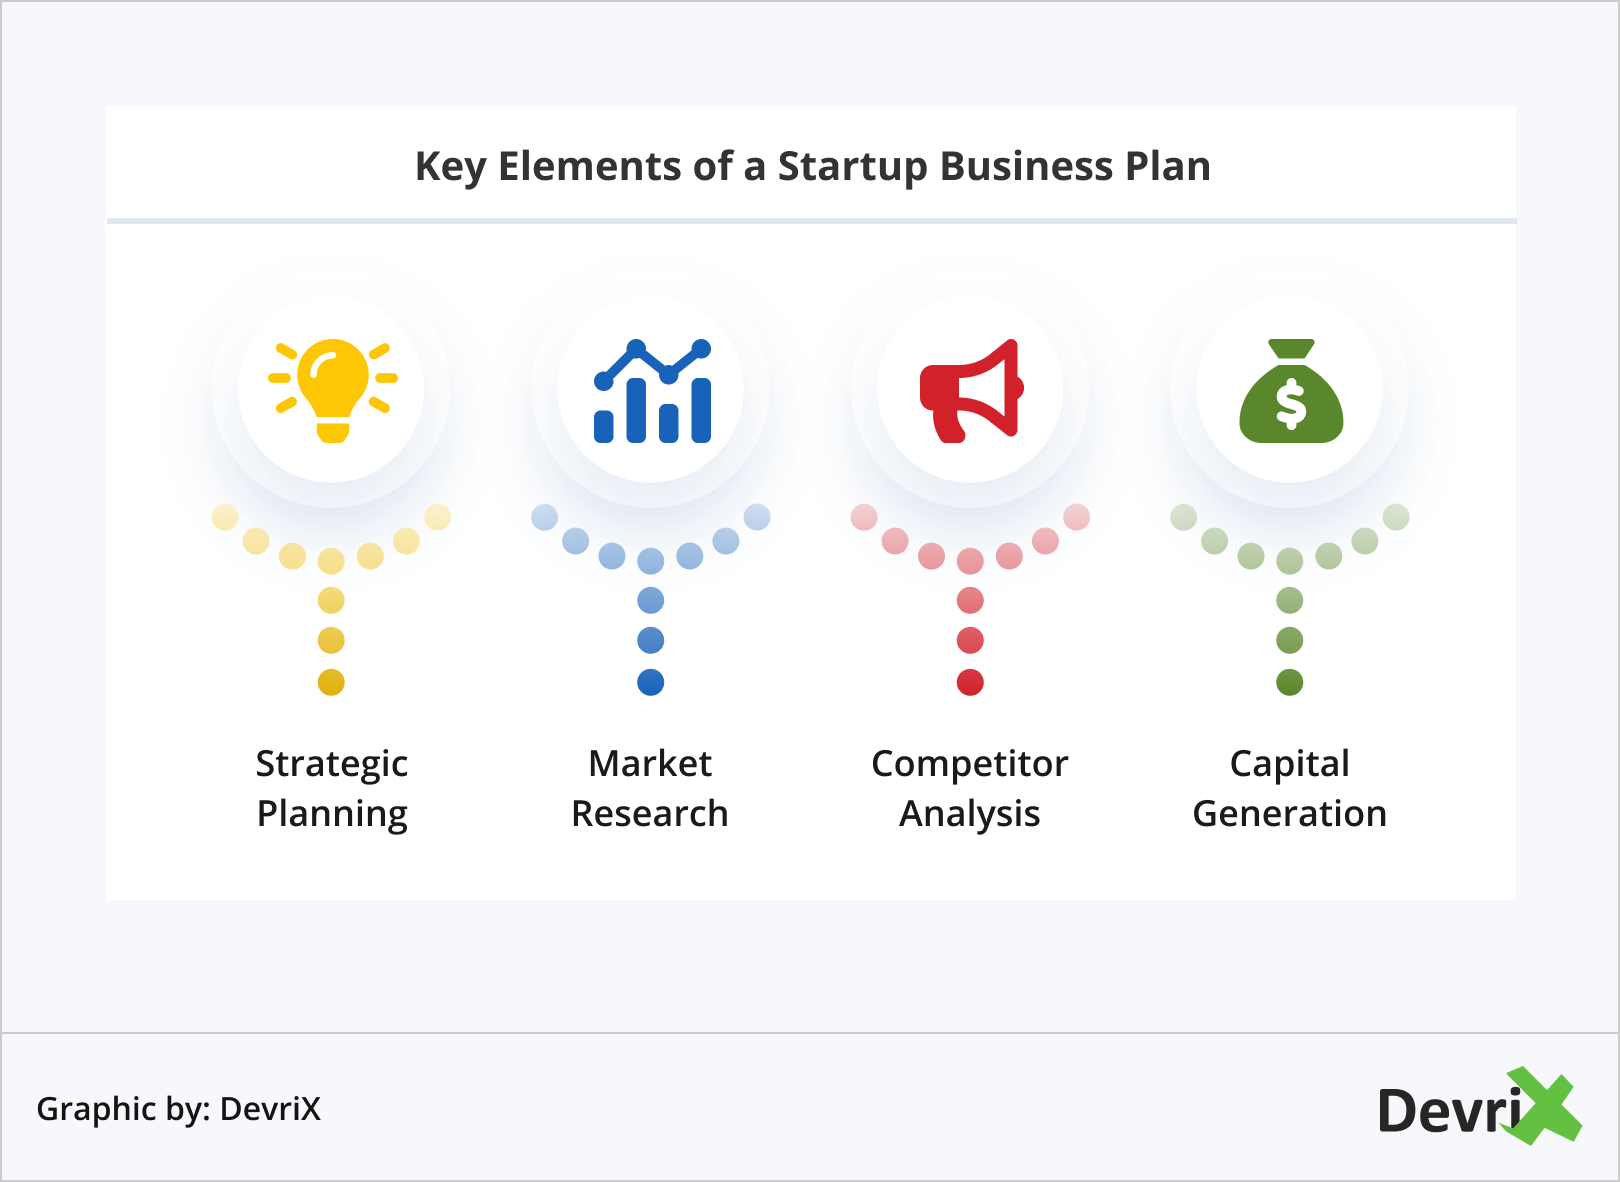 Key Elements of a Startup Business Plan